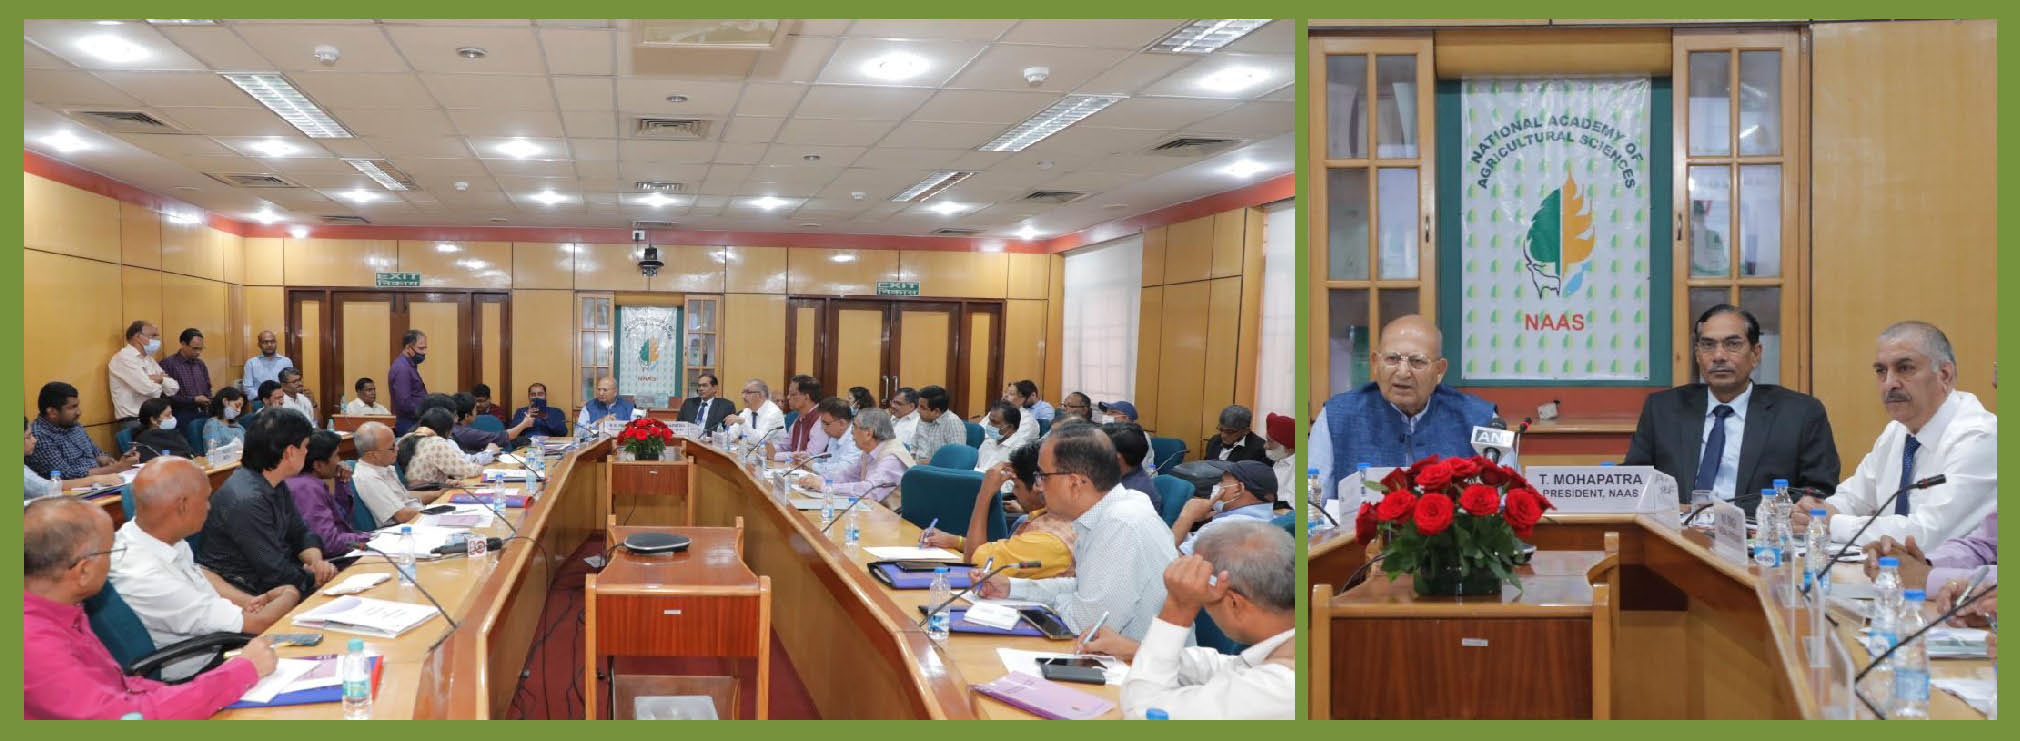 Press Meet Jointly organized by NAAS and TAAS on Environmental Release of Transgenic Mustard Hybrid DMH11 by MoEF&CC. The conference was addressed by Dr. R.S. Paroda (Founder Chairman, TAAS), Dr. T. Mohapatra (President, NAAS), Prof. K.C. Bansal (Secretary, NAAS) and other experts.